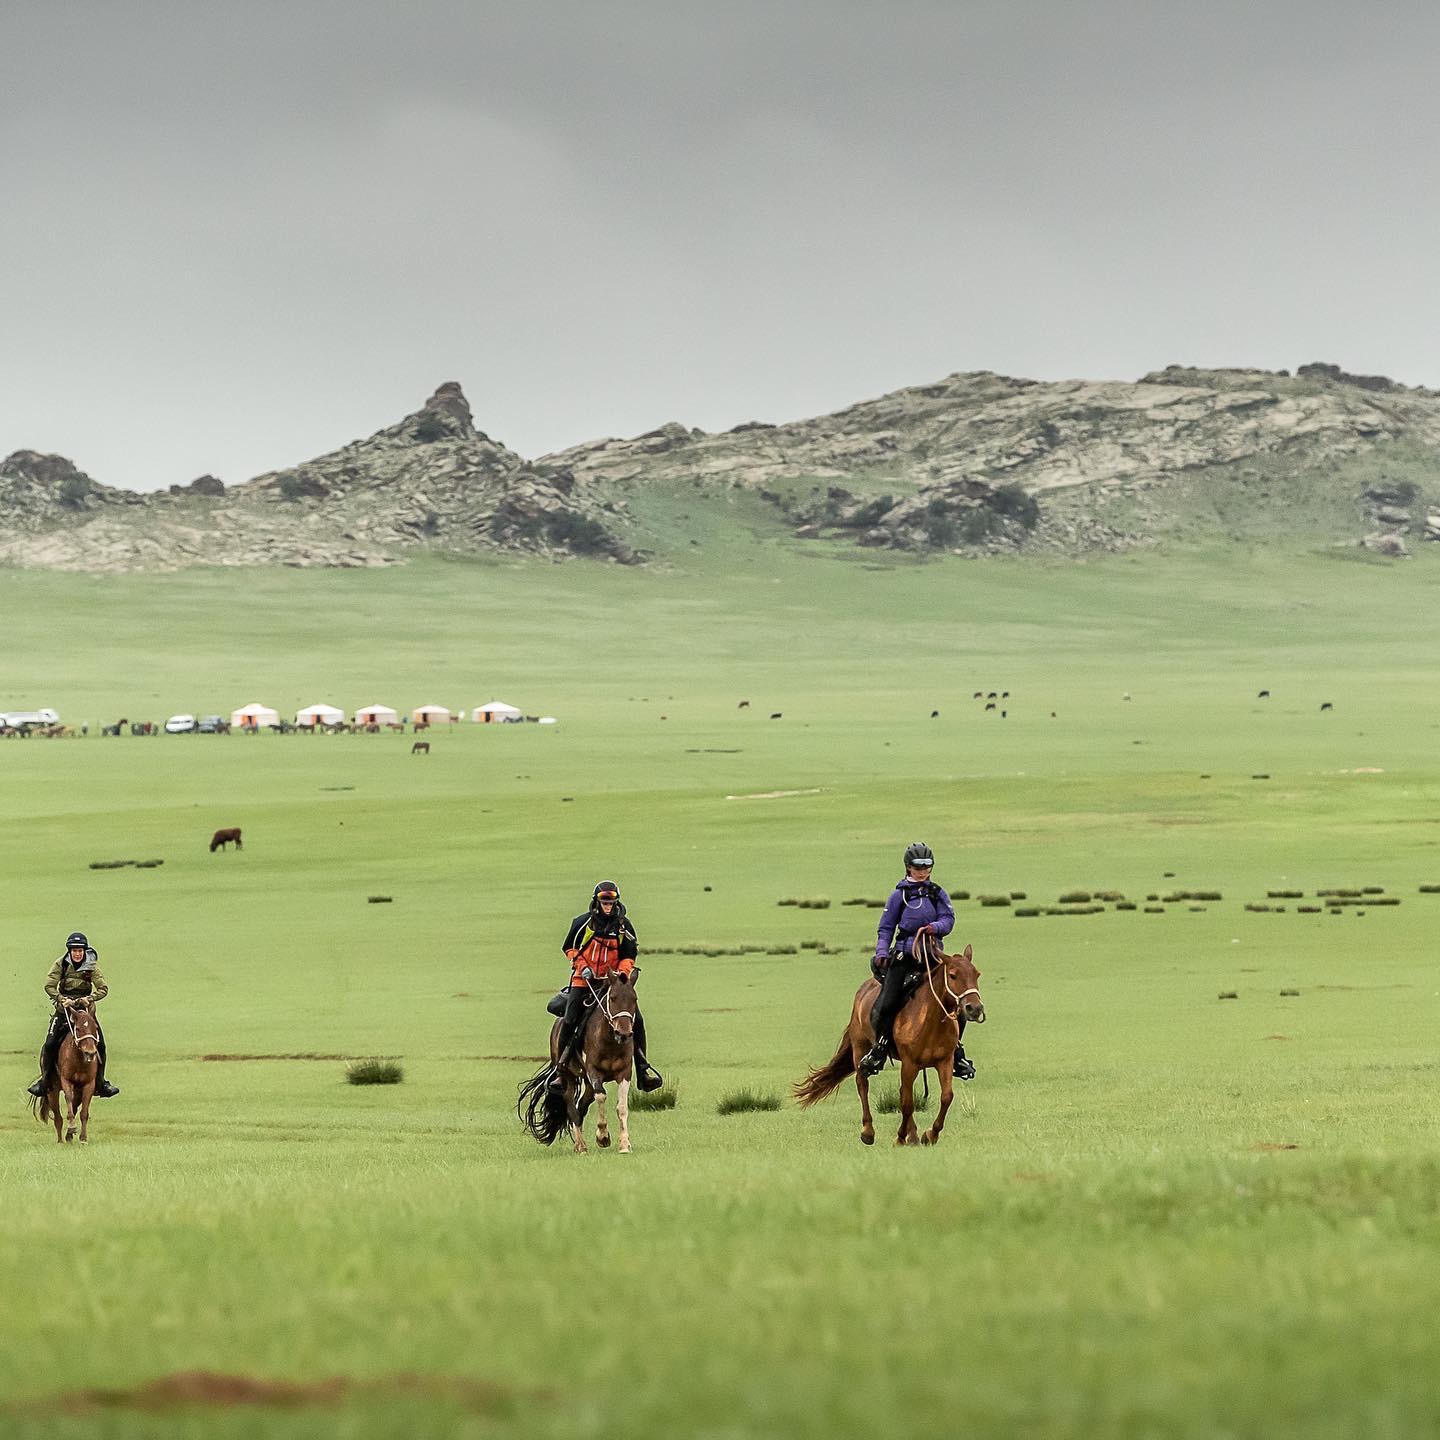 Kelsey on the 2019 Mongol Derby